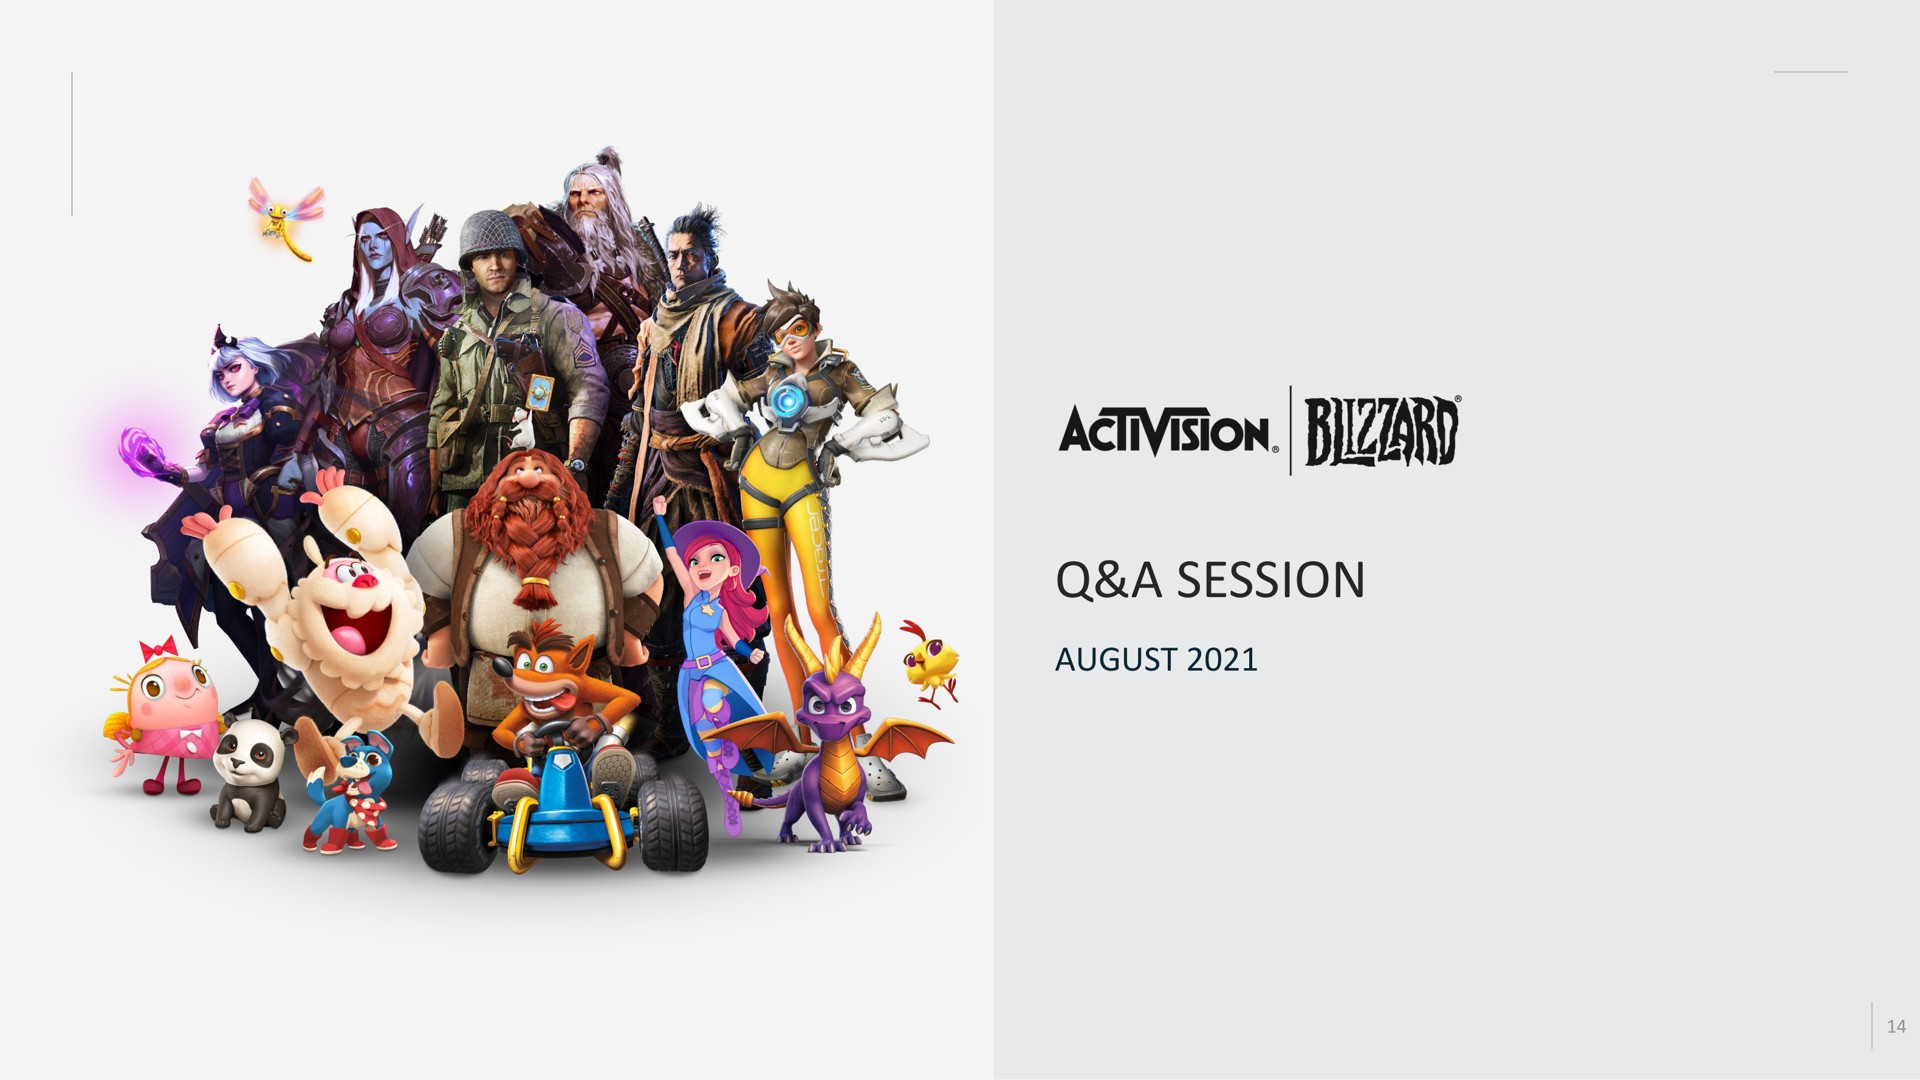 a session august | Activision Blizzard